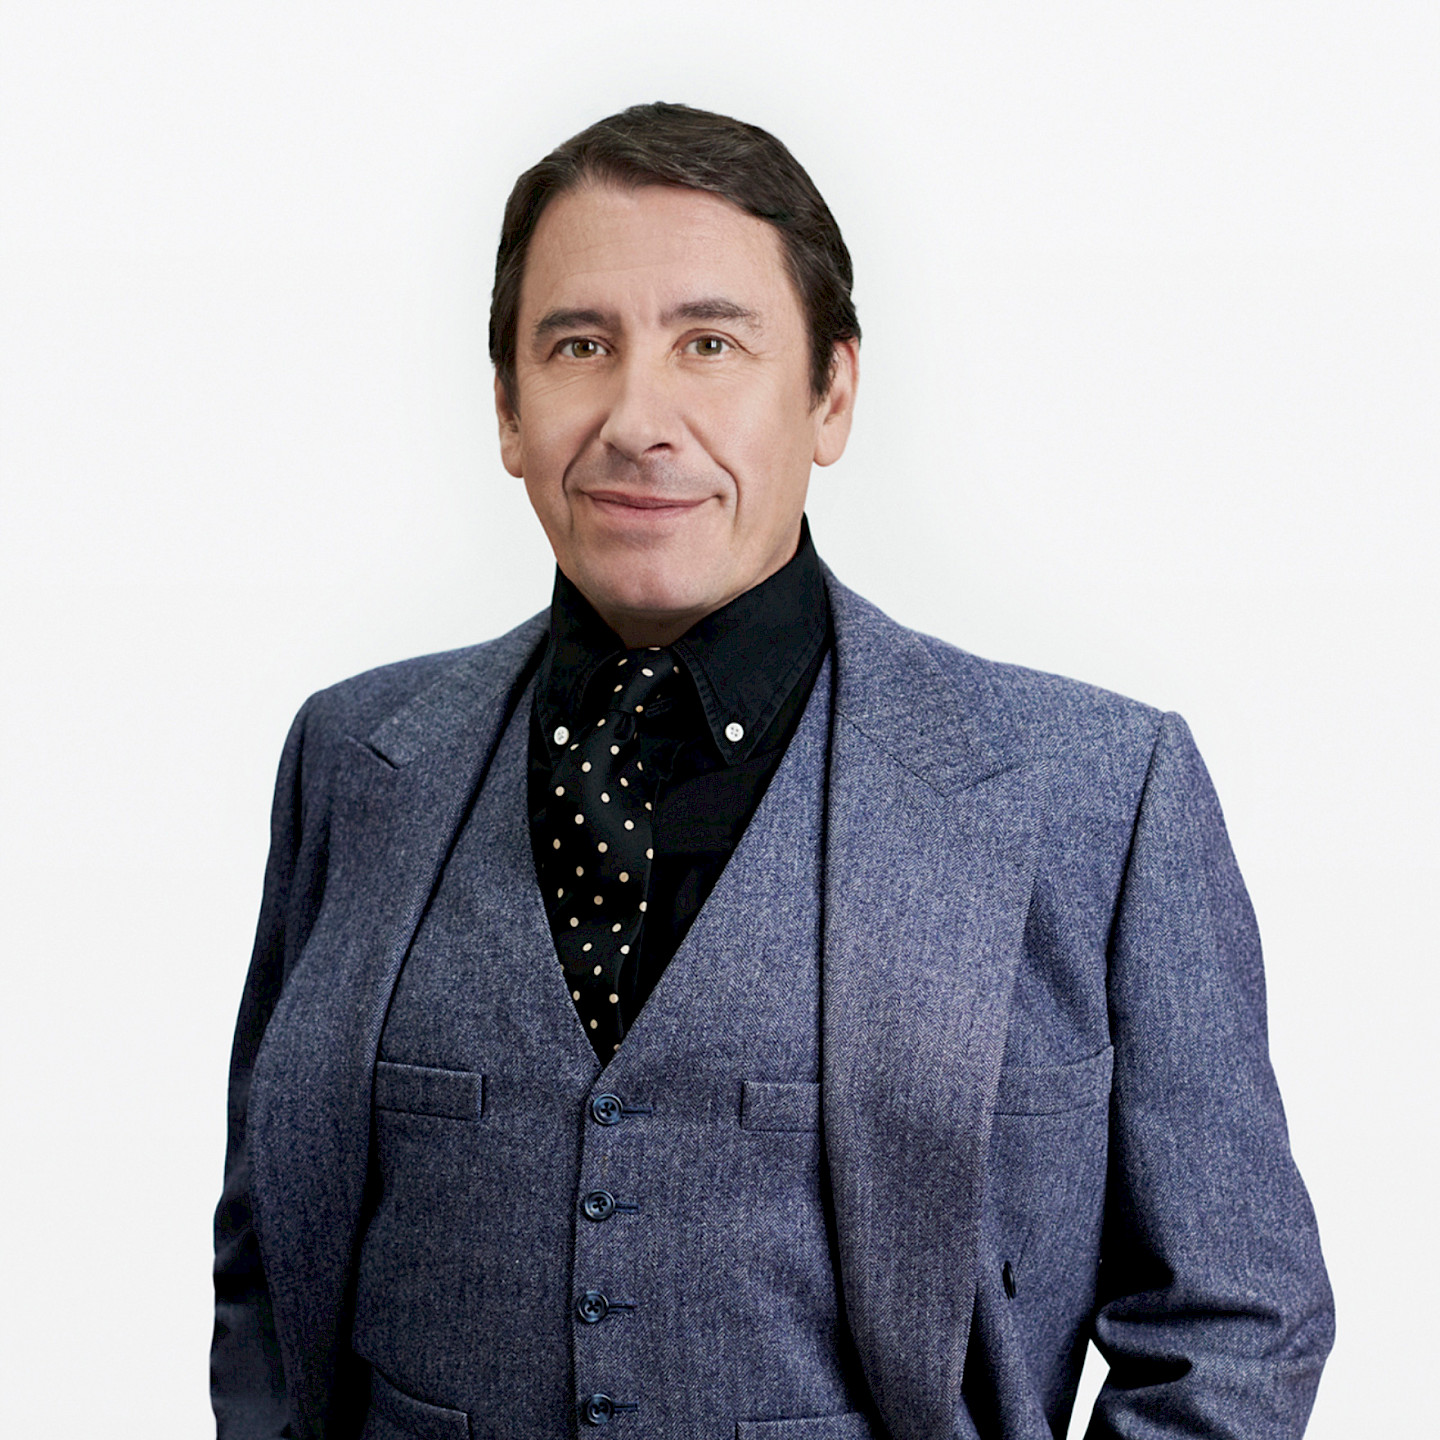 An Evening with Jools Holland with special guests Ruby Turner & Louise Marshall